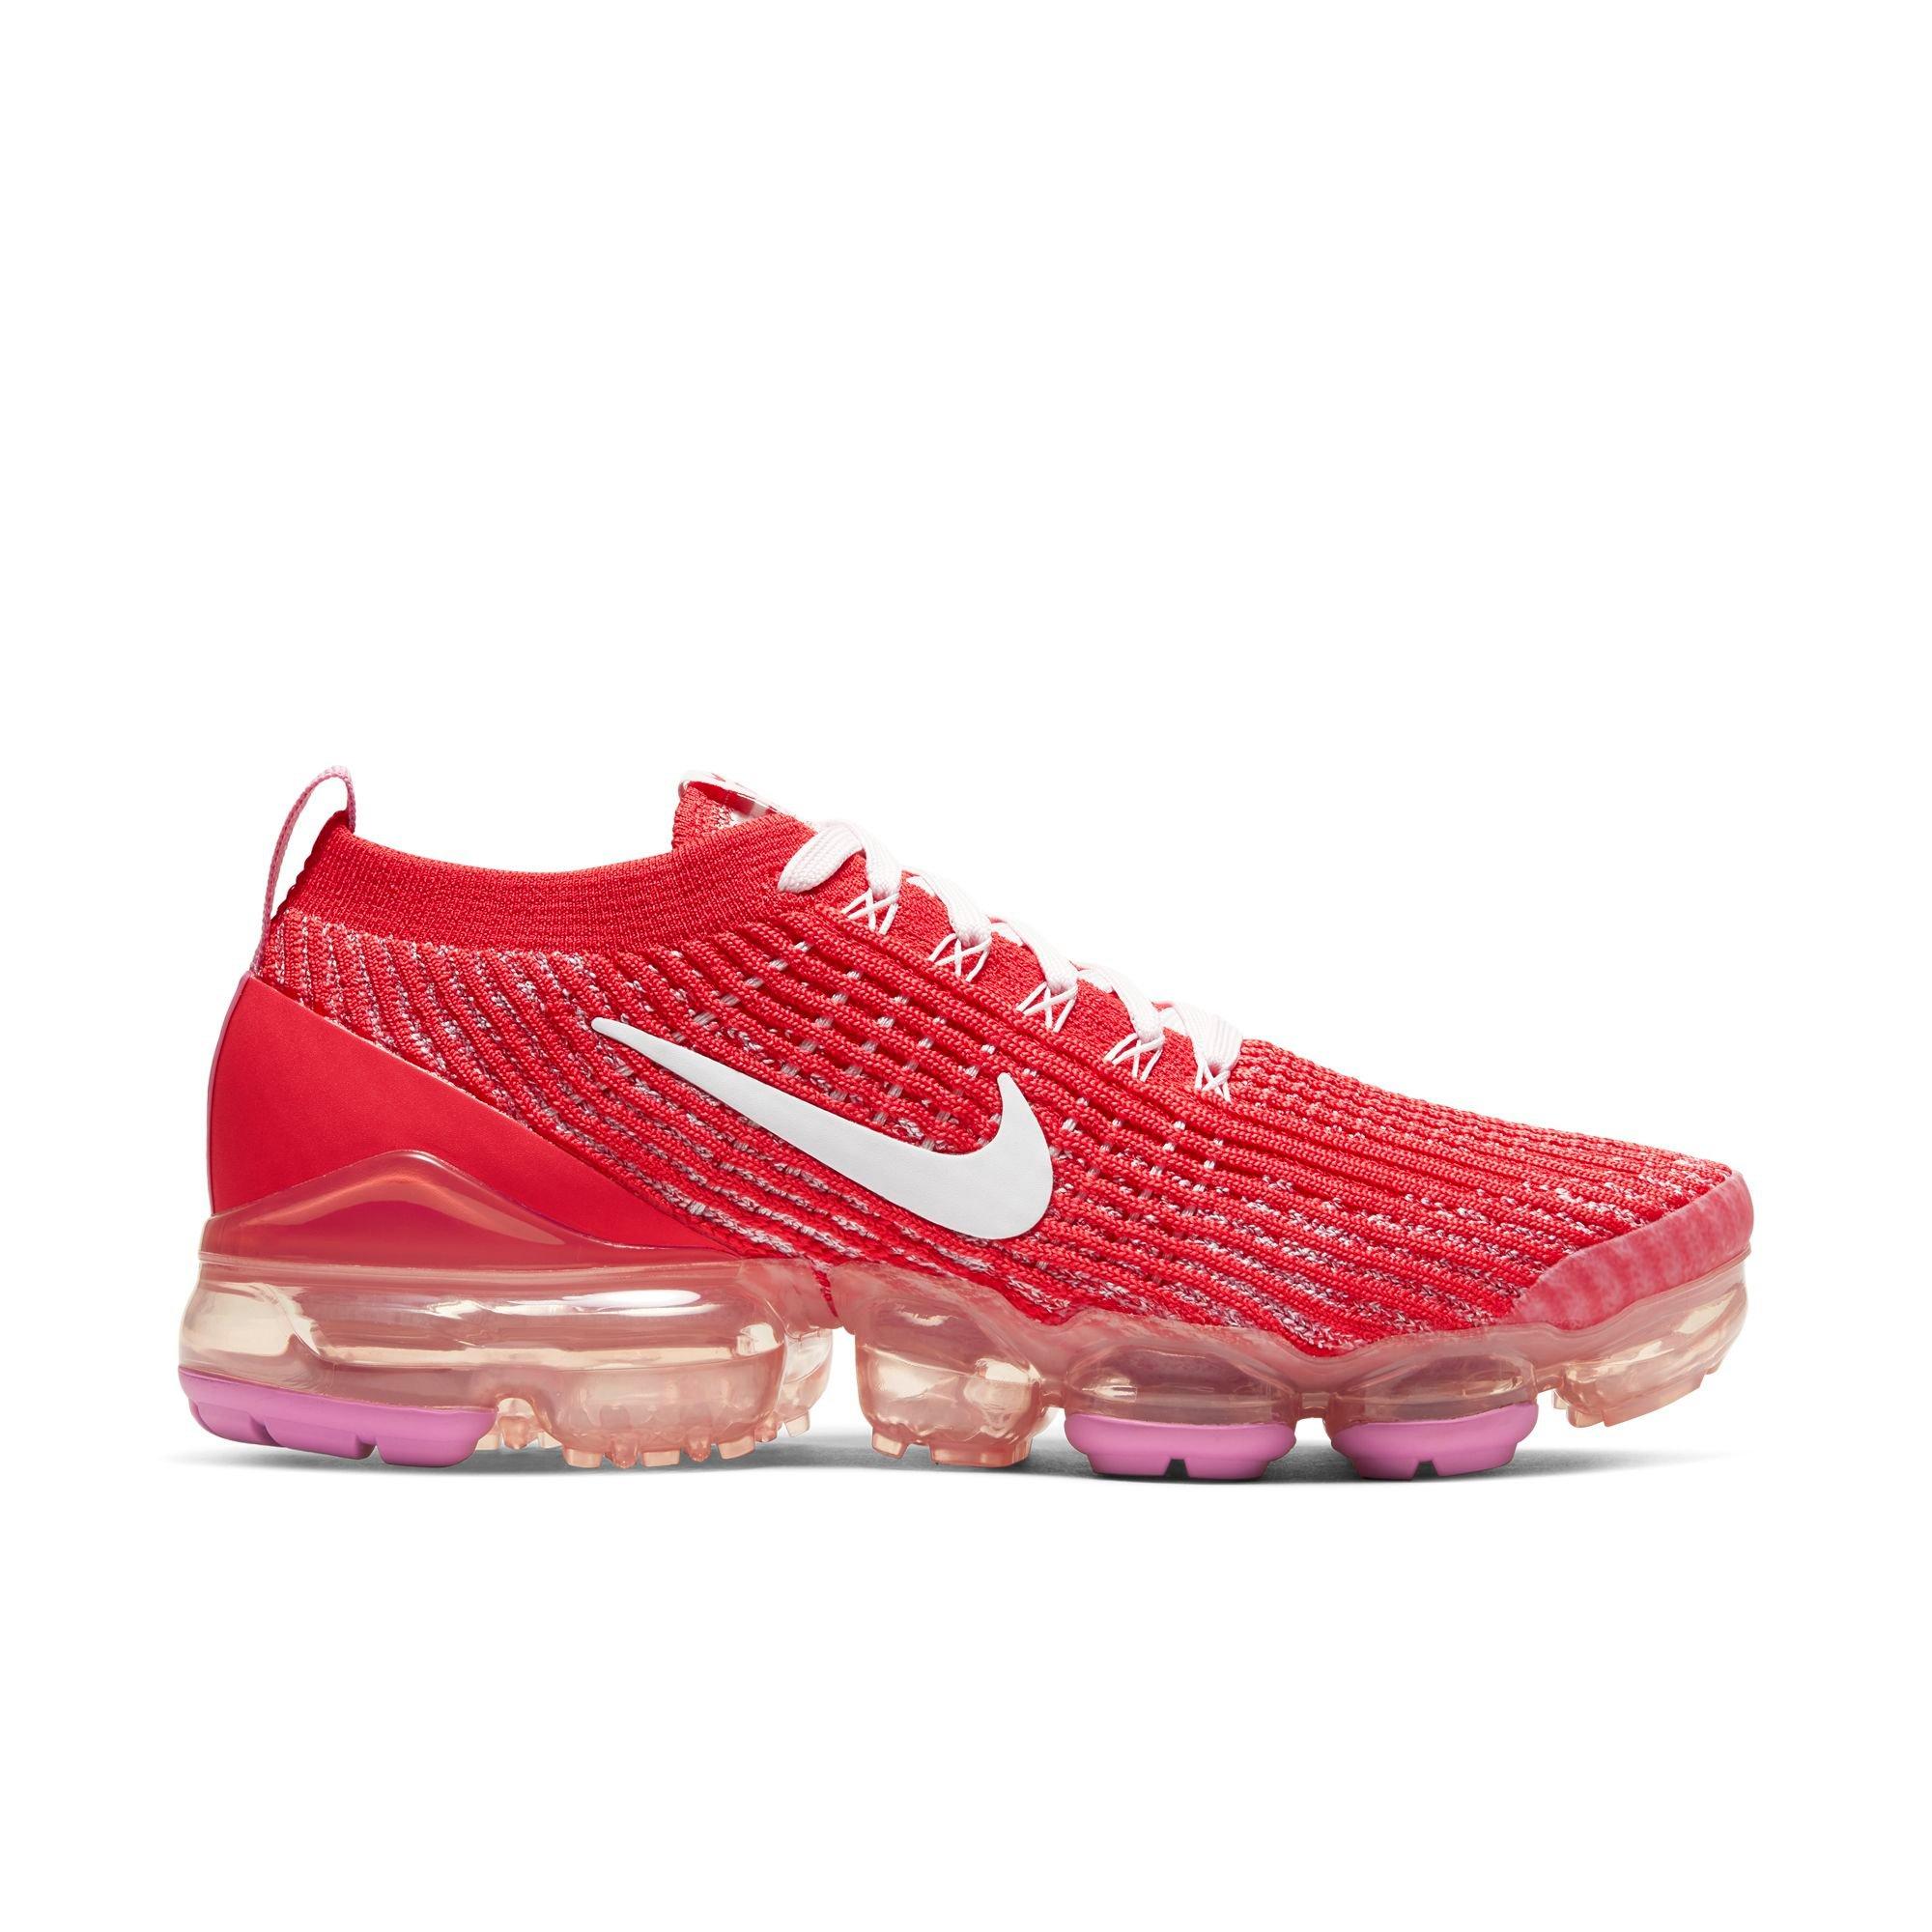 vapormax flyknit red and white